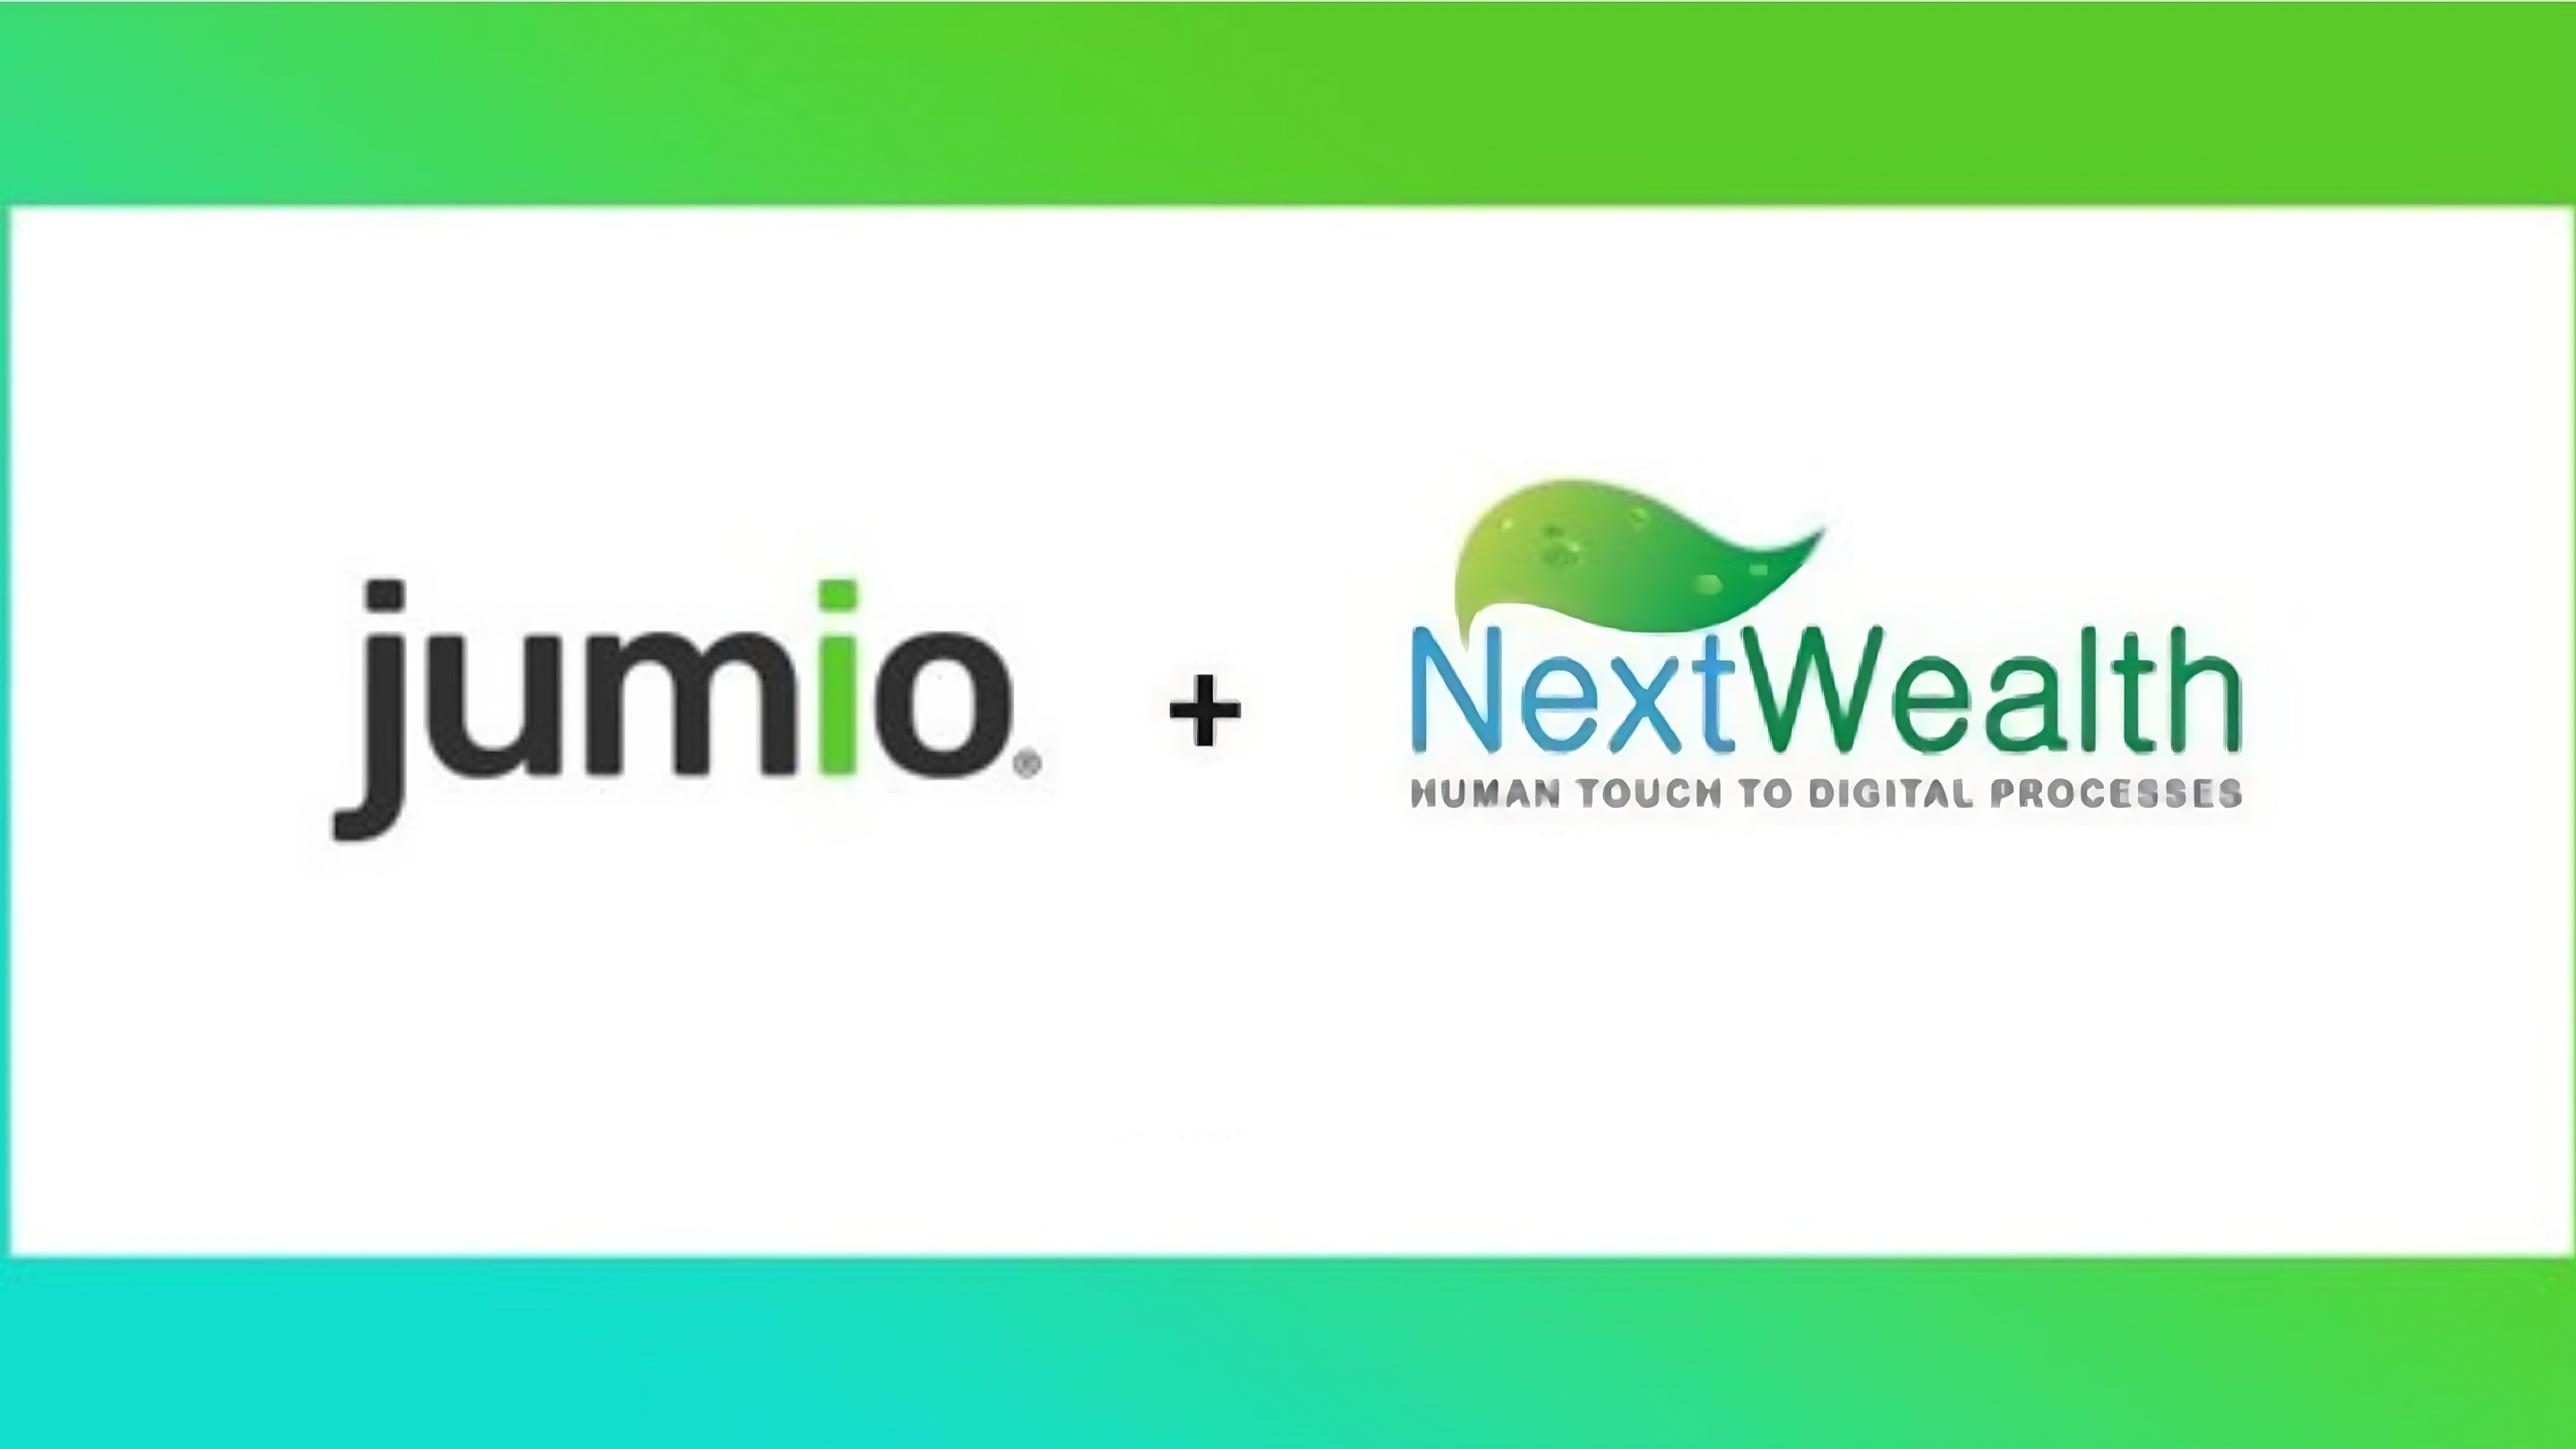 https://adgully.me/post/3689/nextwealth-increases-footprint-through-expanded-global-partnership-with-jumio